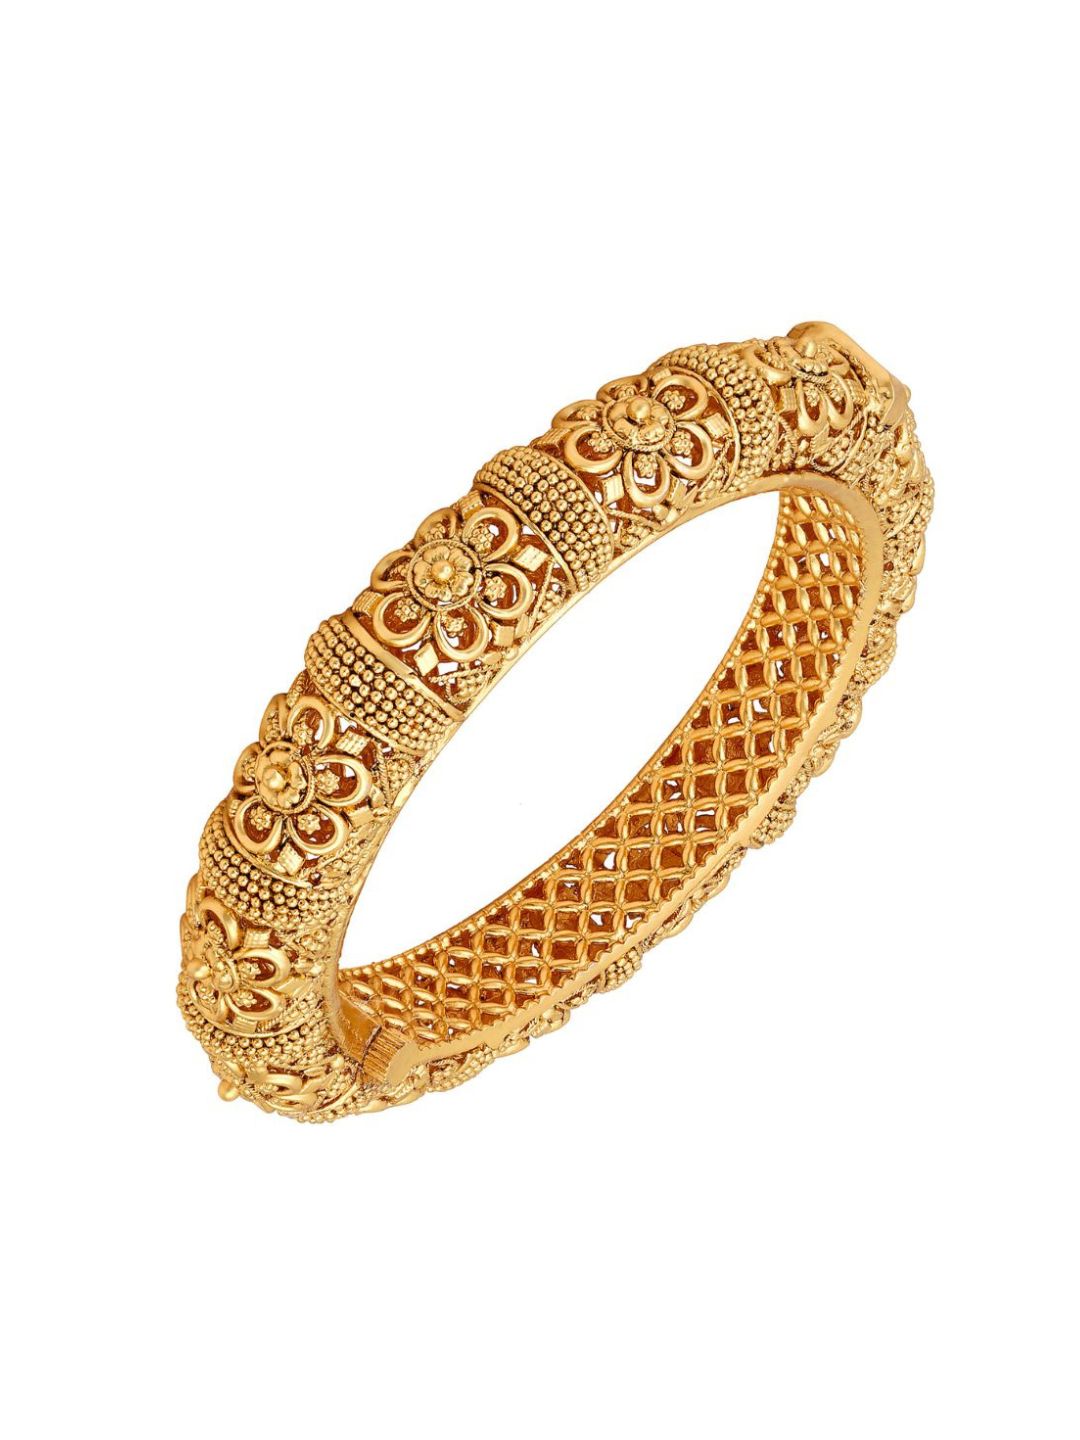 ACCESSHER Gold Plated Traditional and Ethnic Bangles Inspired Antique Finish Screw Closure Statement Kada/Bangles/Festive Bangles Set of 2 for Women and girls